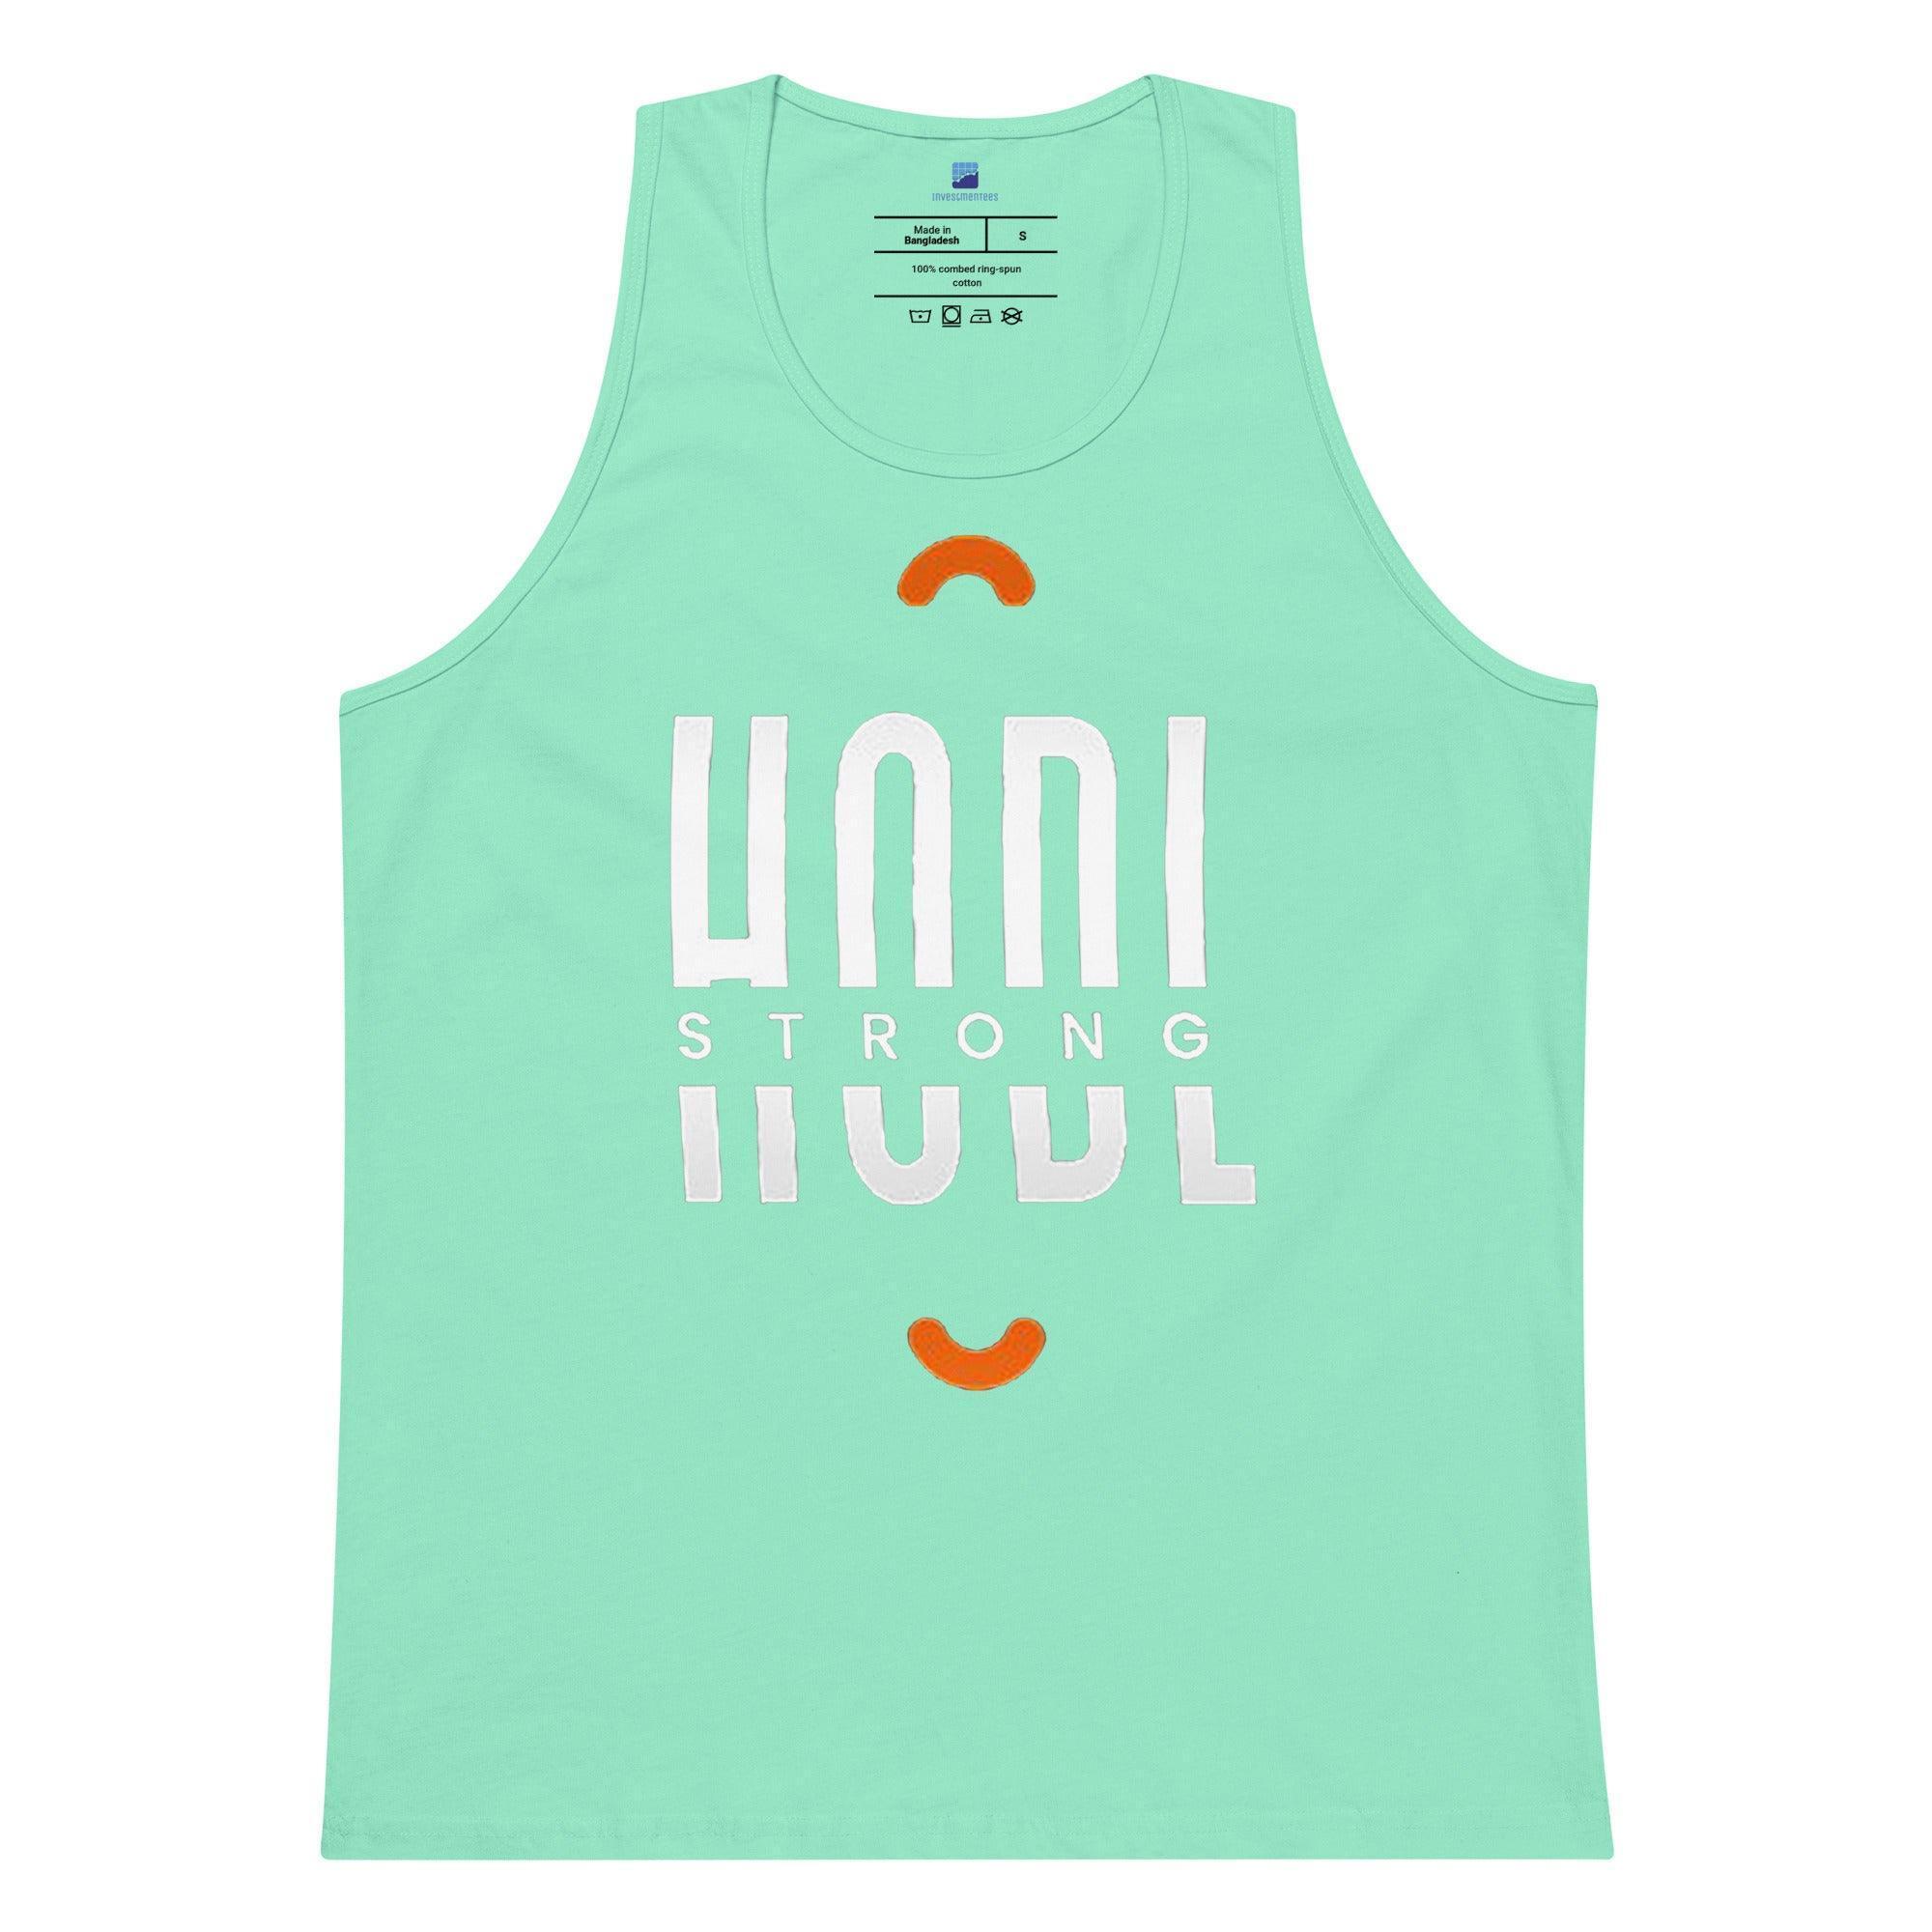 HODL Strong Tank Top - InvestmenTees